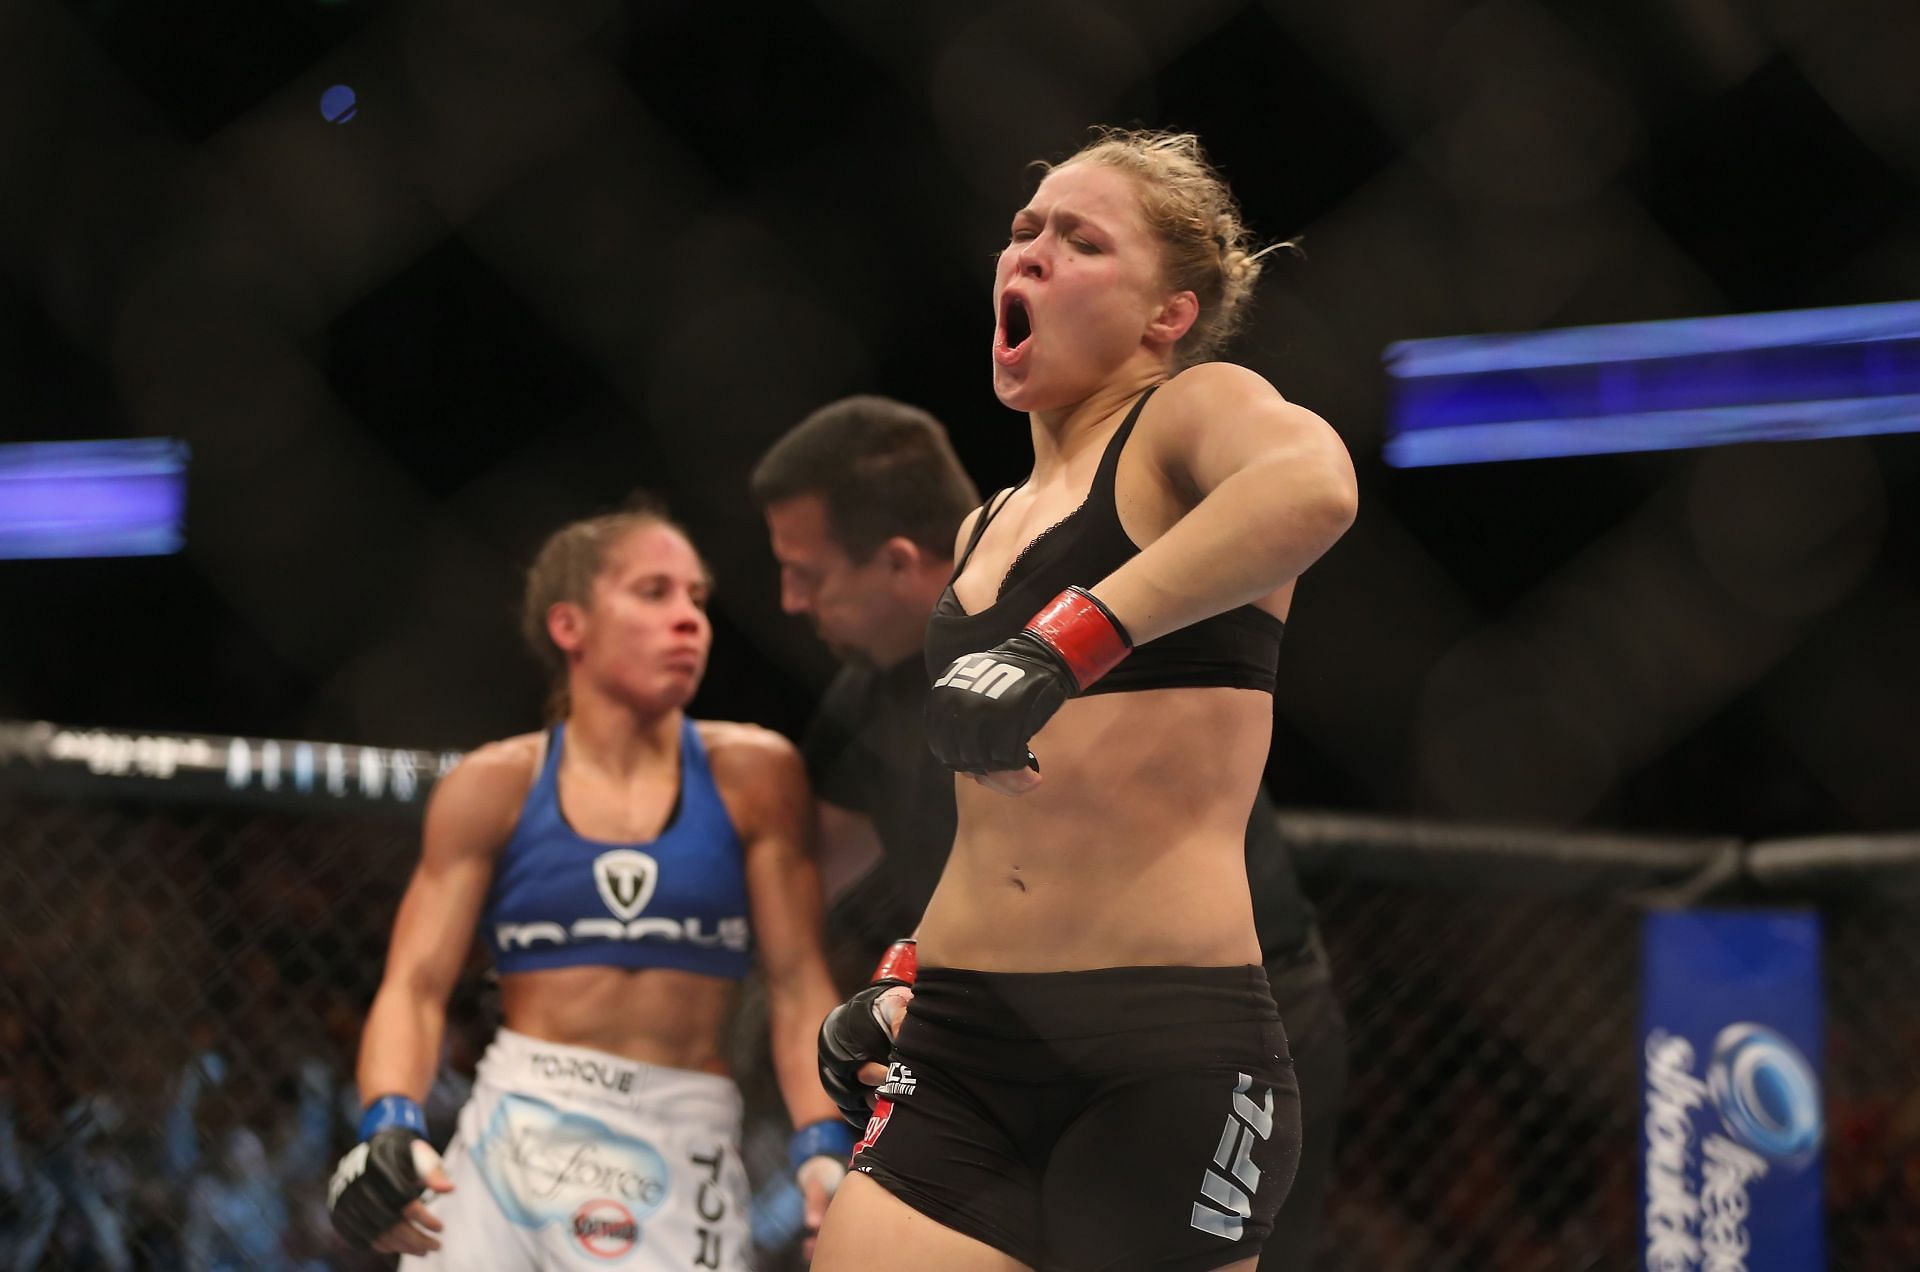 StrikeForce helped to launch the career of Ronda Rousey